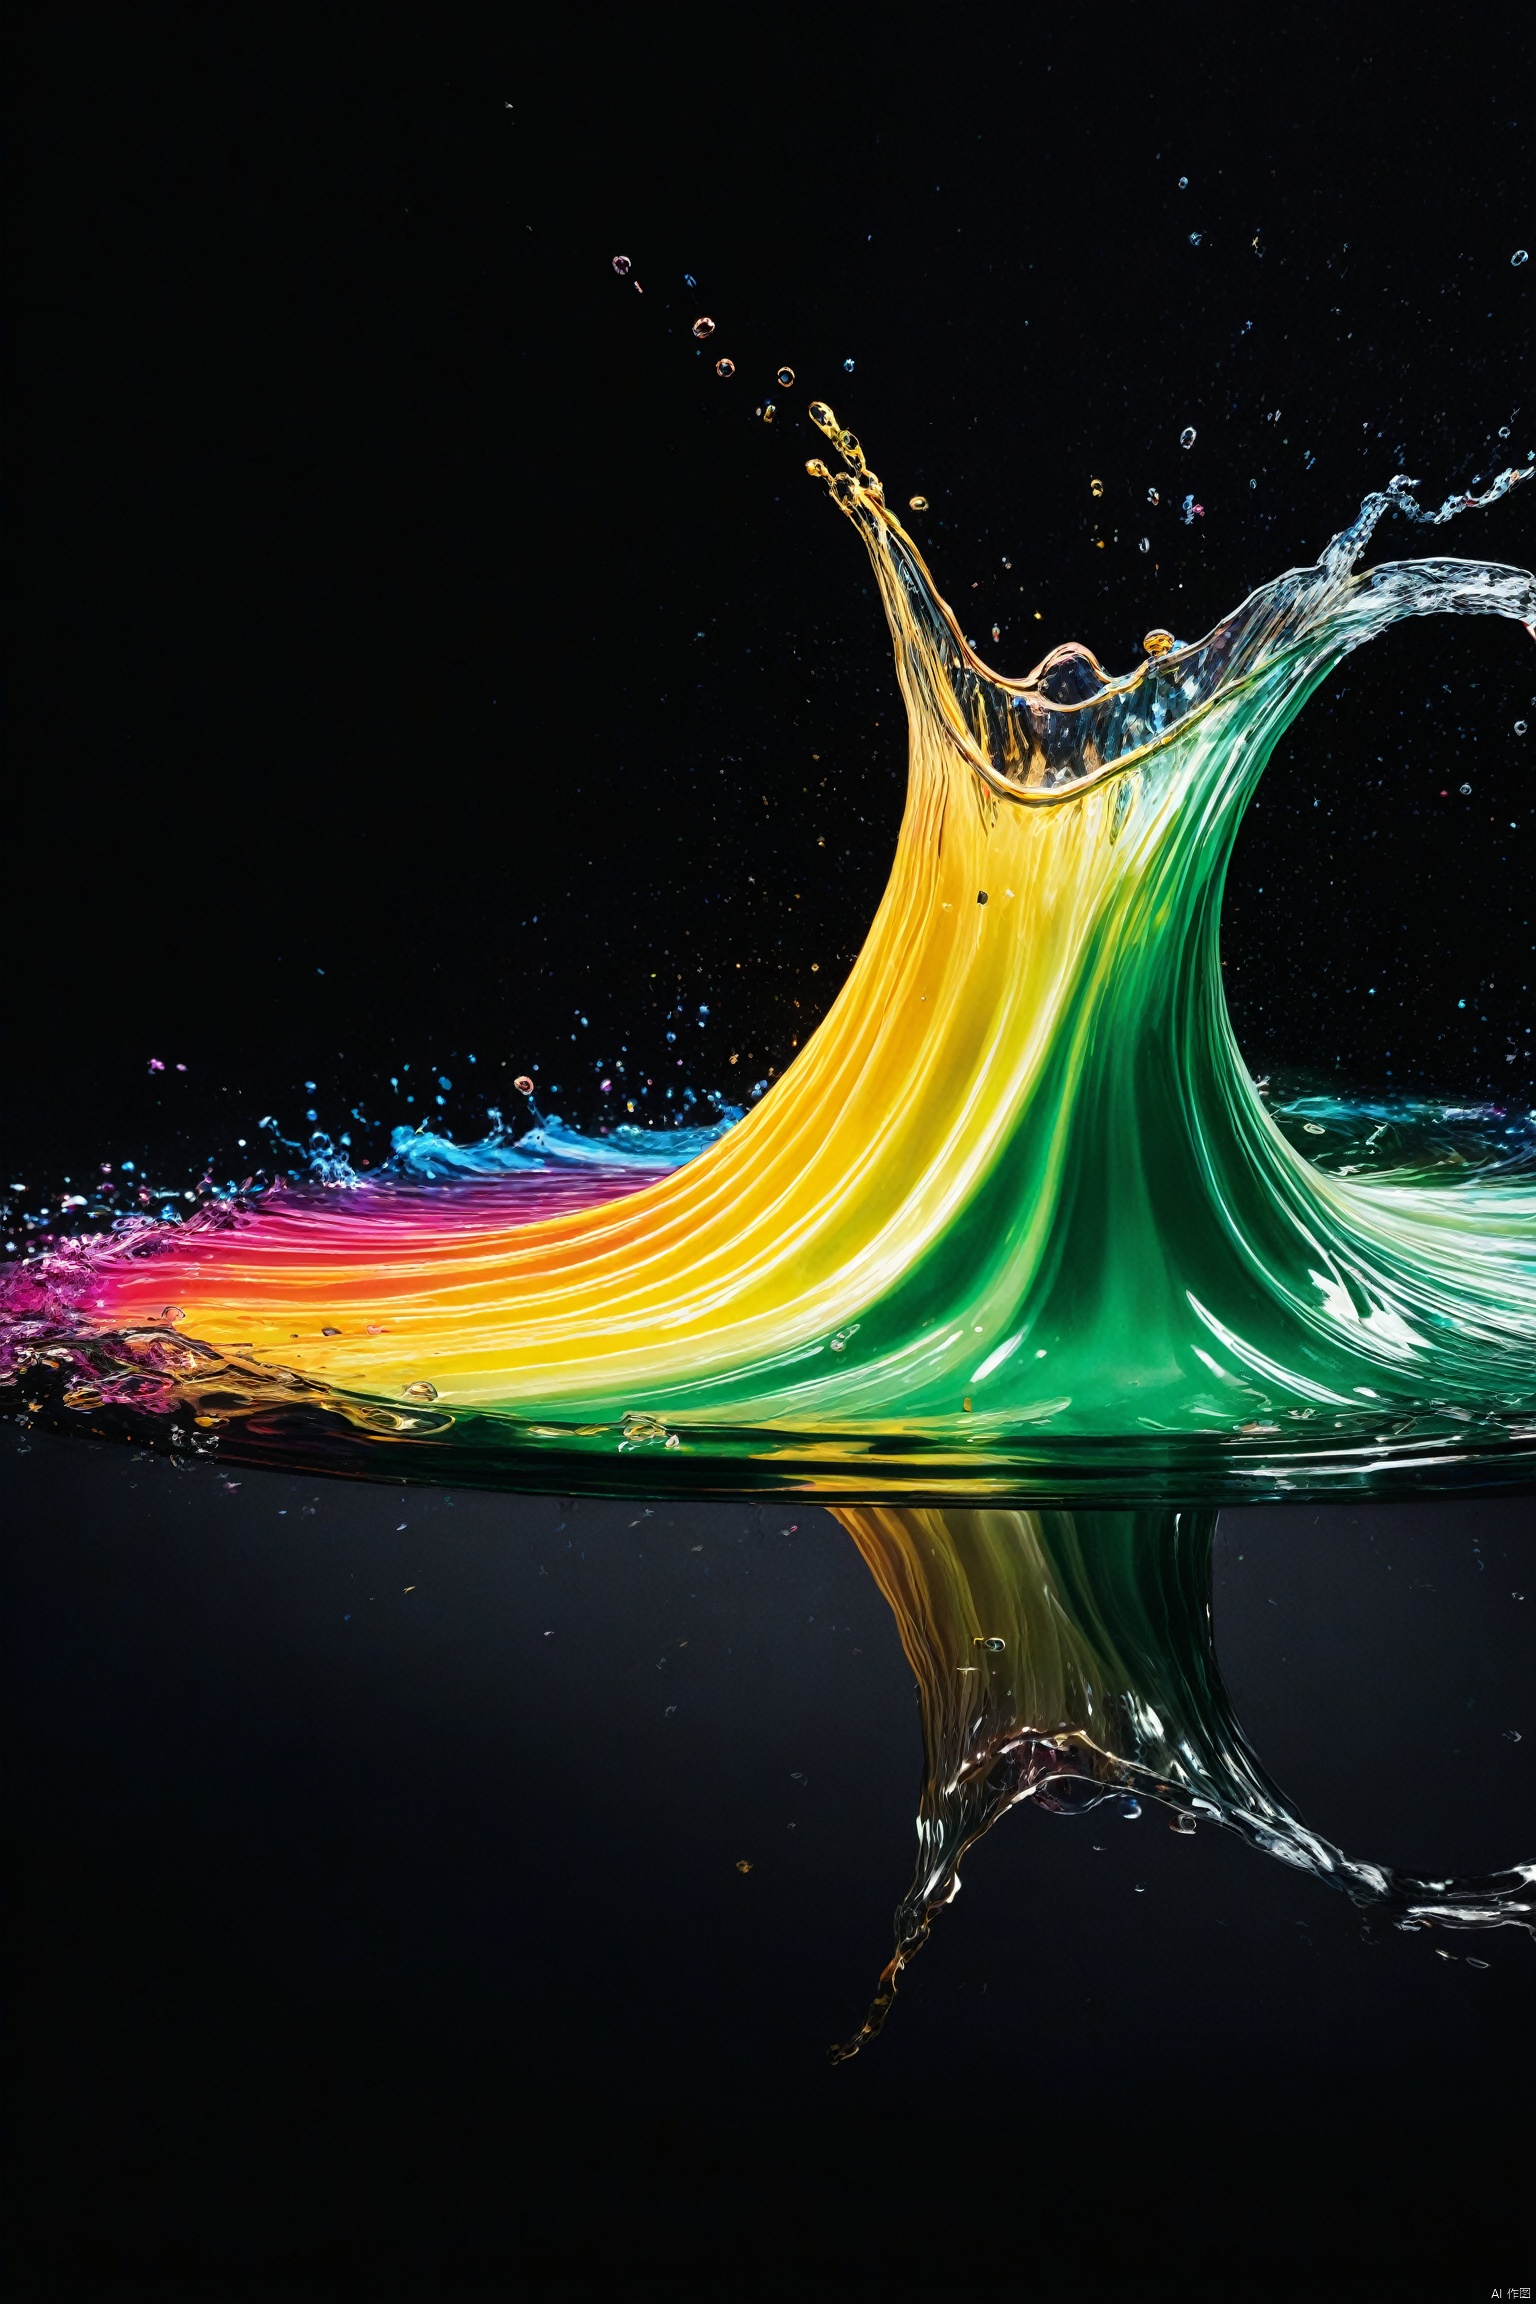  black background, water, ray tracing, f/1.2,Poster,flowing,geen,sprinkle,dynamic and colorful,gradient,shiny,phantom,still life,no humans,magazine cover,Graphic design,